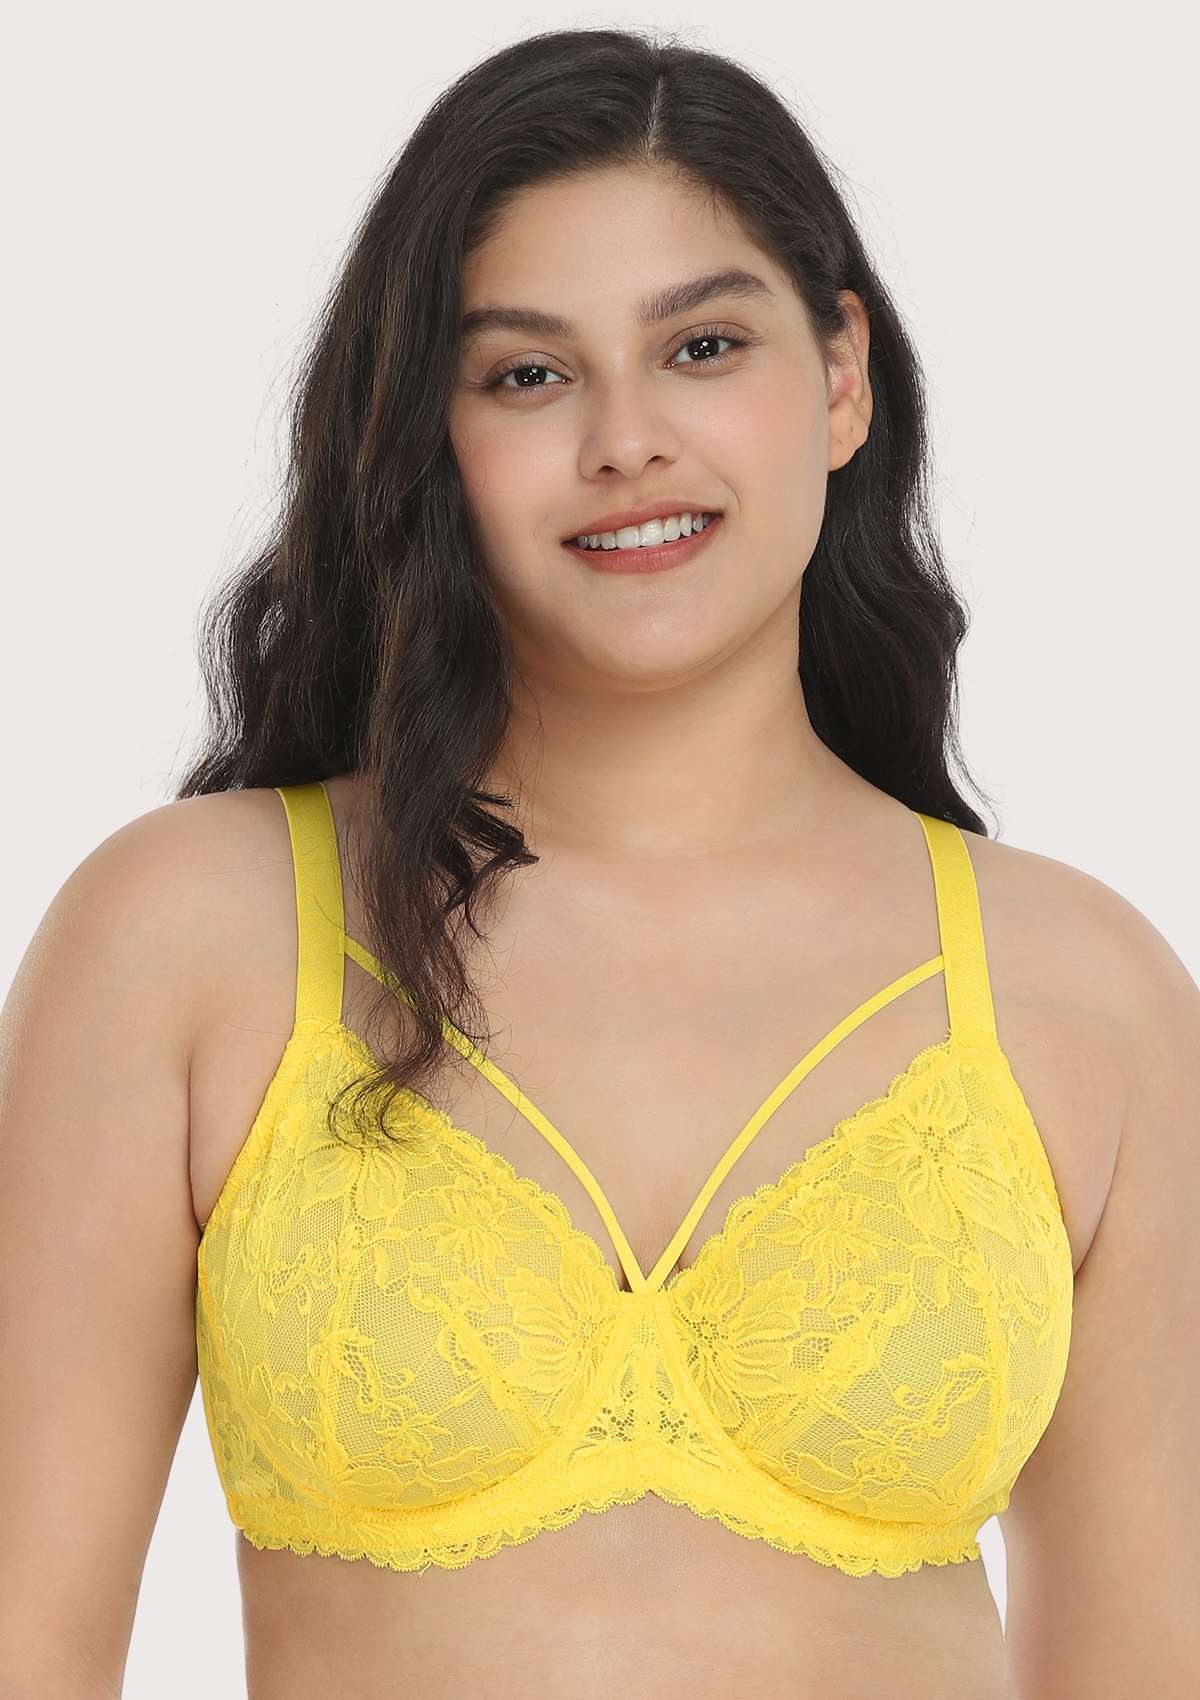 HSIA Unlined Lace Mesh Minimizer Bra For Large Breasts, Full Coverage - Bright Green / 40 / DD/E